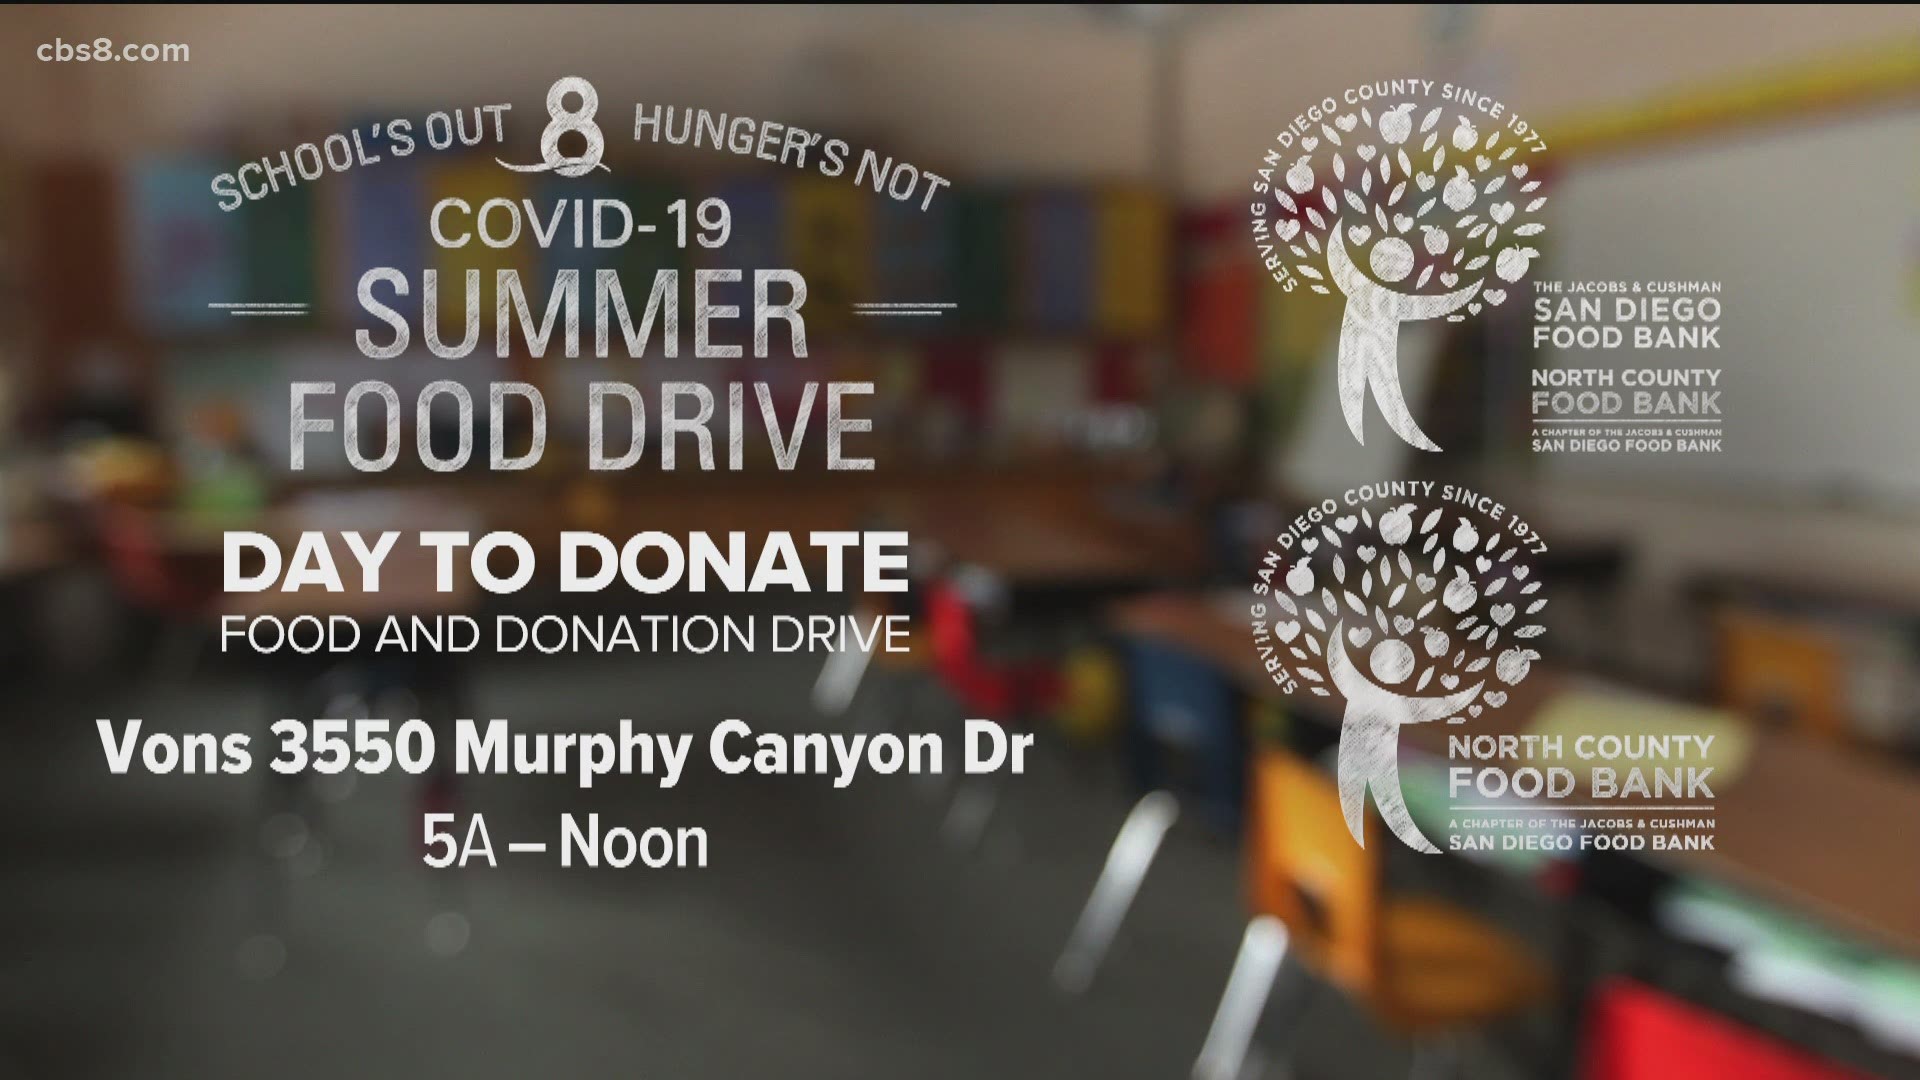 On Wednesday, June 16, CBS News 8 is hosting a Day to Donate drive-thru food drive at the Vons on Murphy Canyon. Here is how you can help local kids in need.